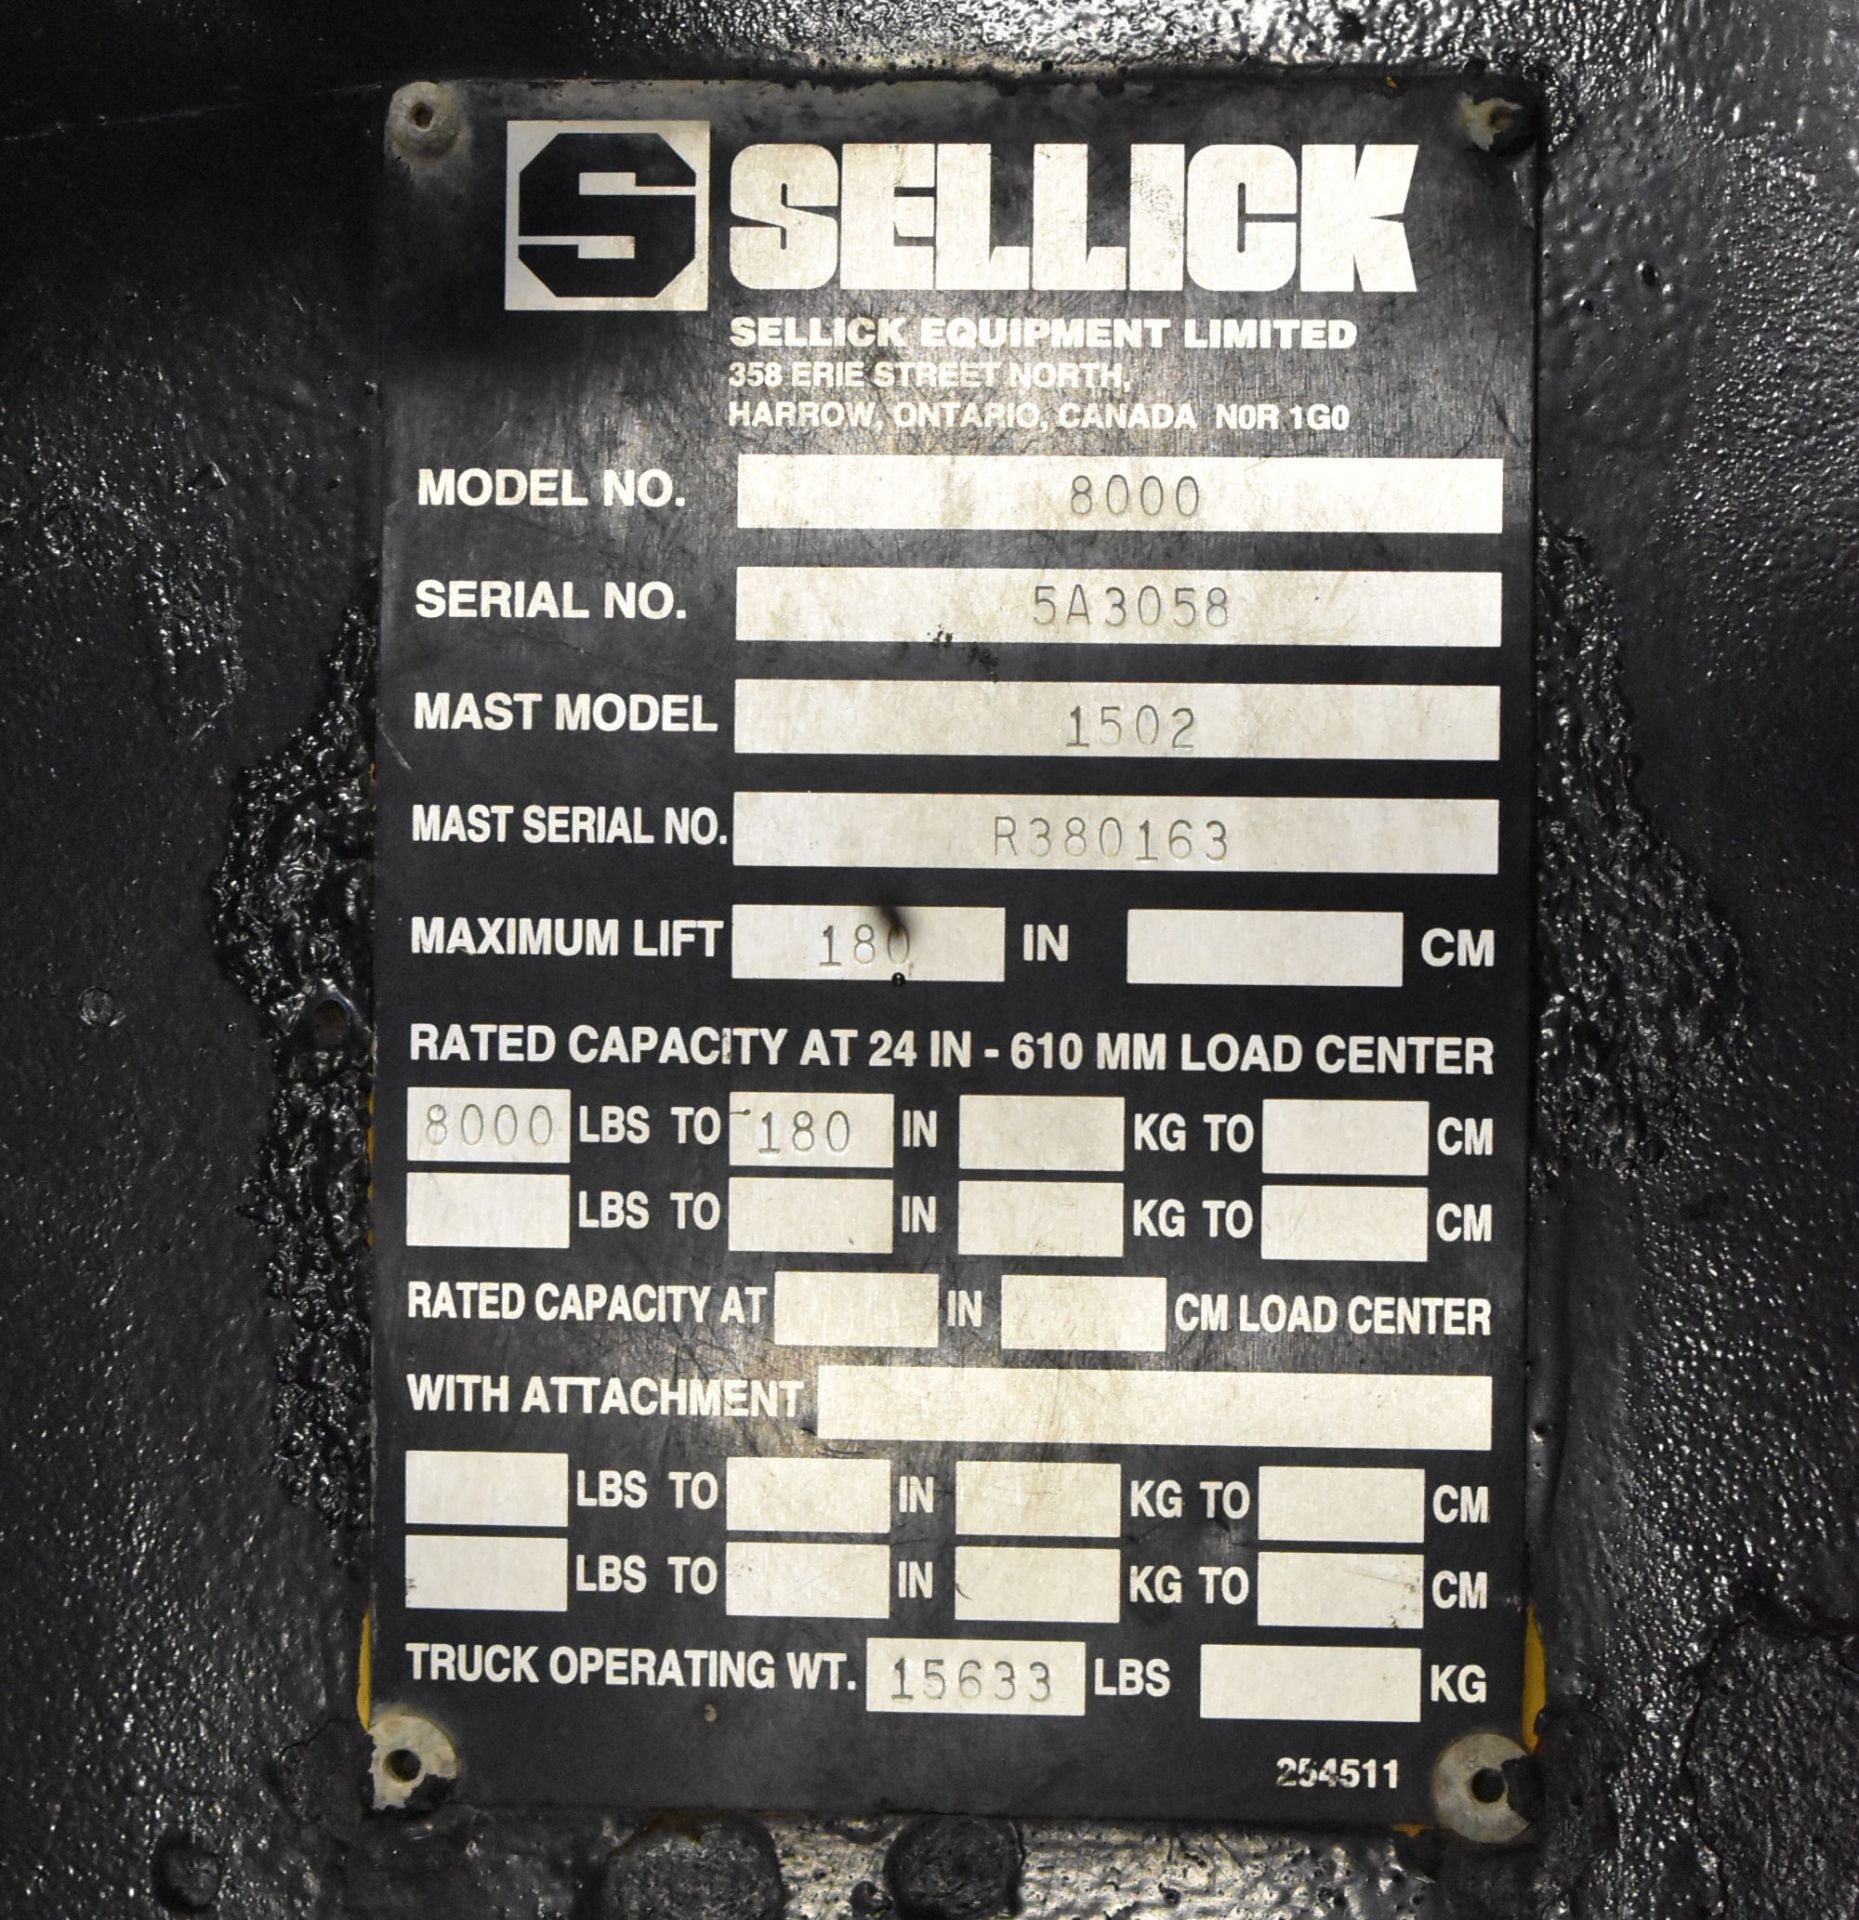 SELLICK MODEL 8000 8000 LB. CAPACITY OUTDOOR DIESEL FORKLIFT WITH 180" MAX. LIFT HEIGHT, 3-STAGE - Image 10 of 10